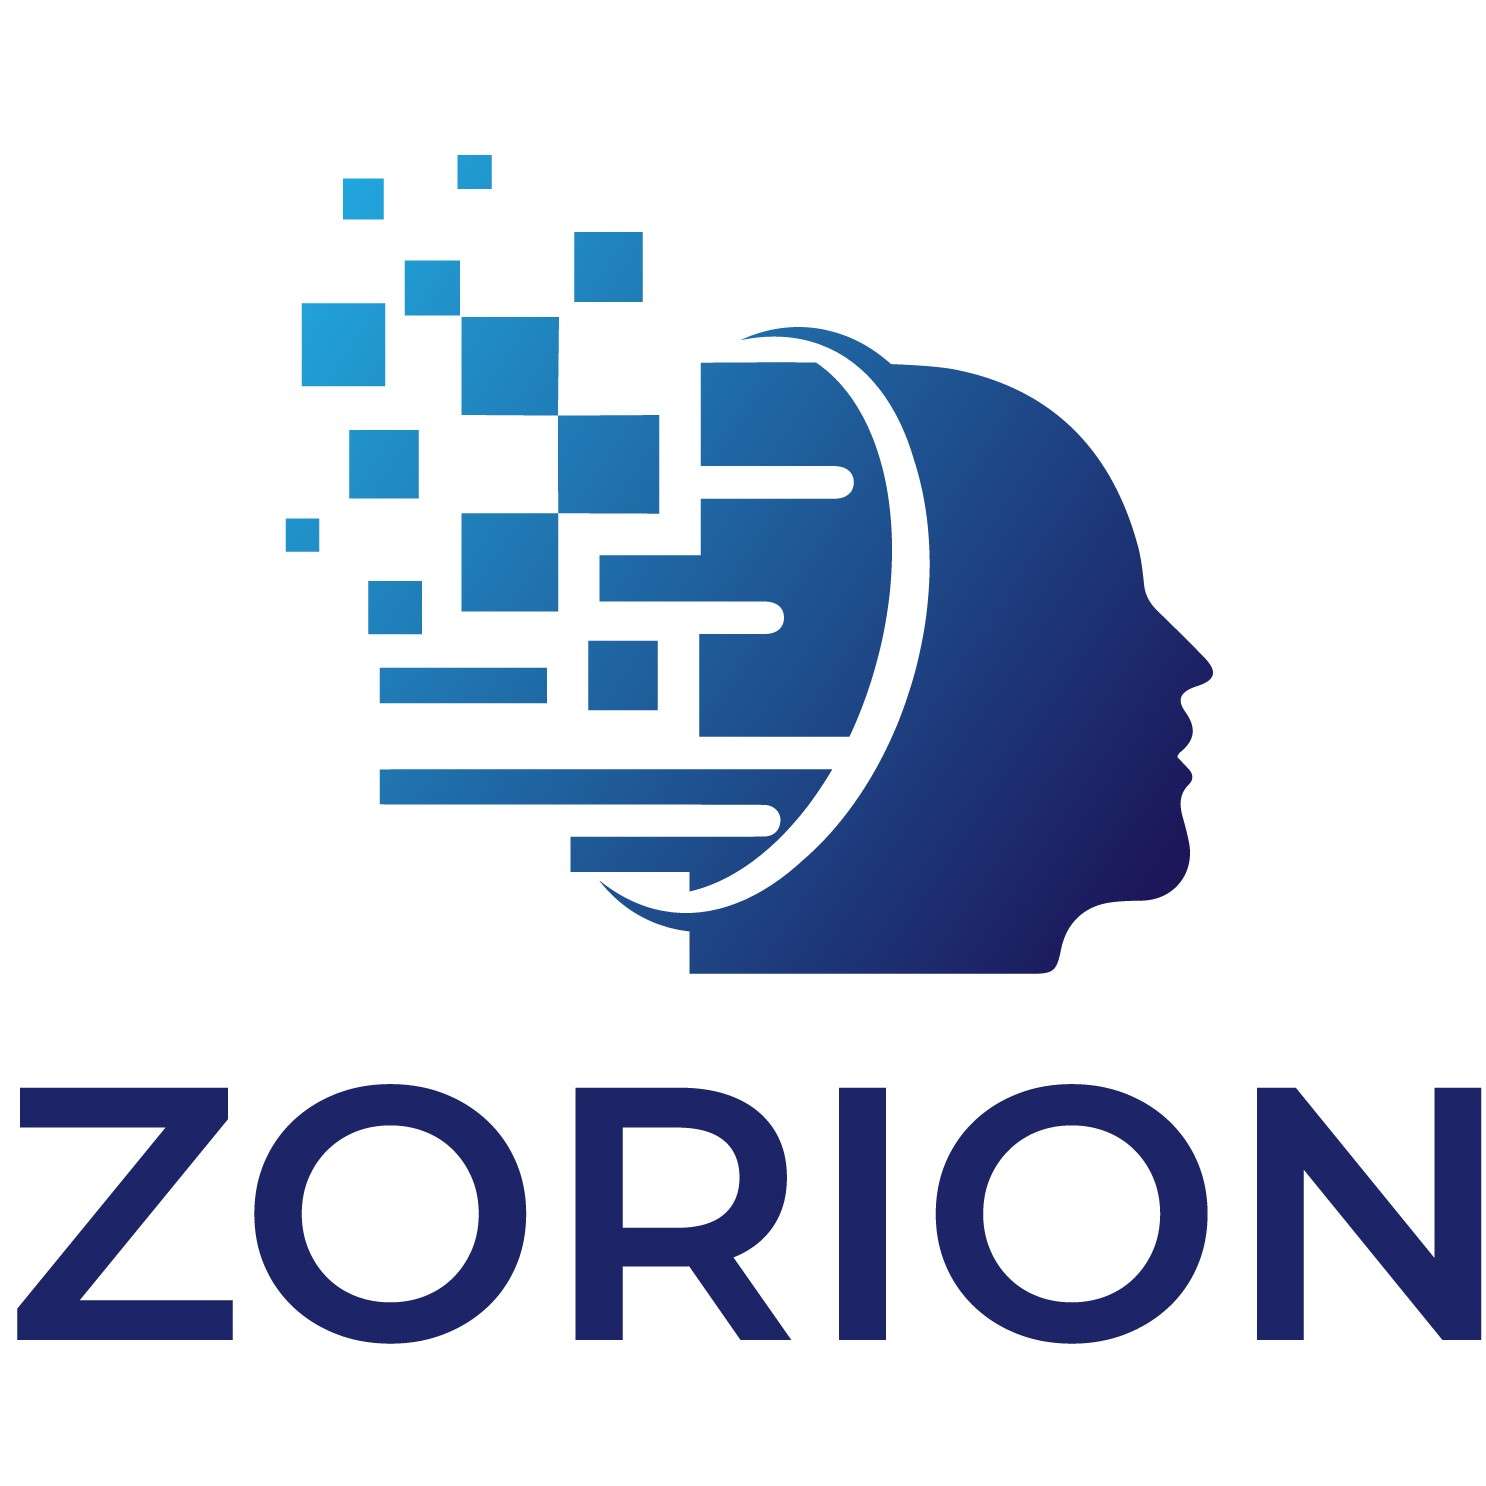 Zorion